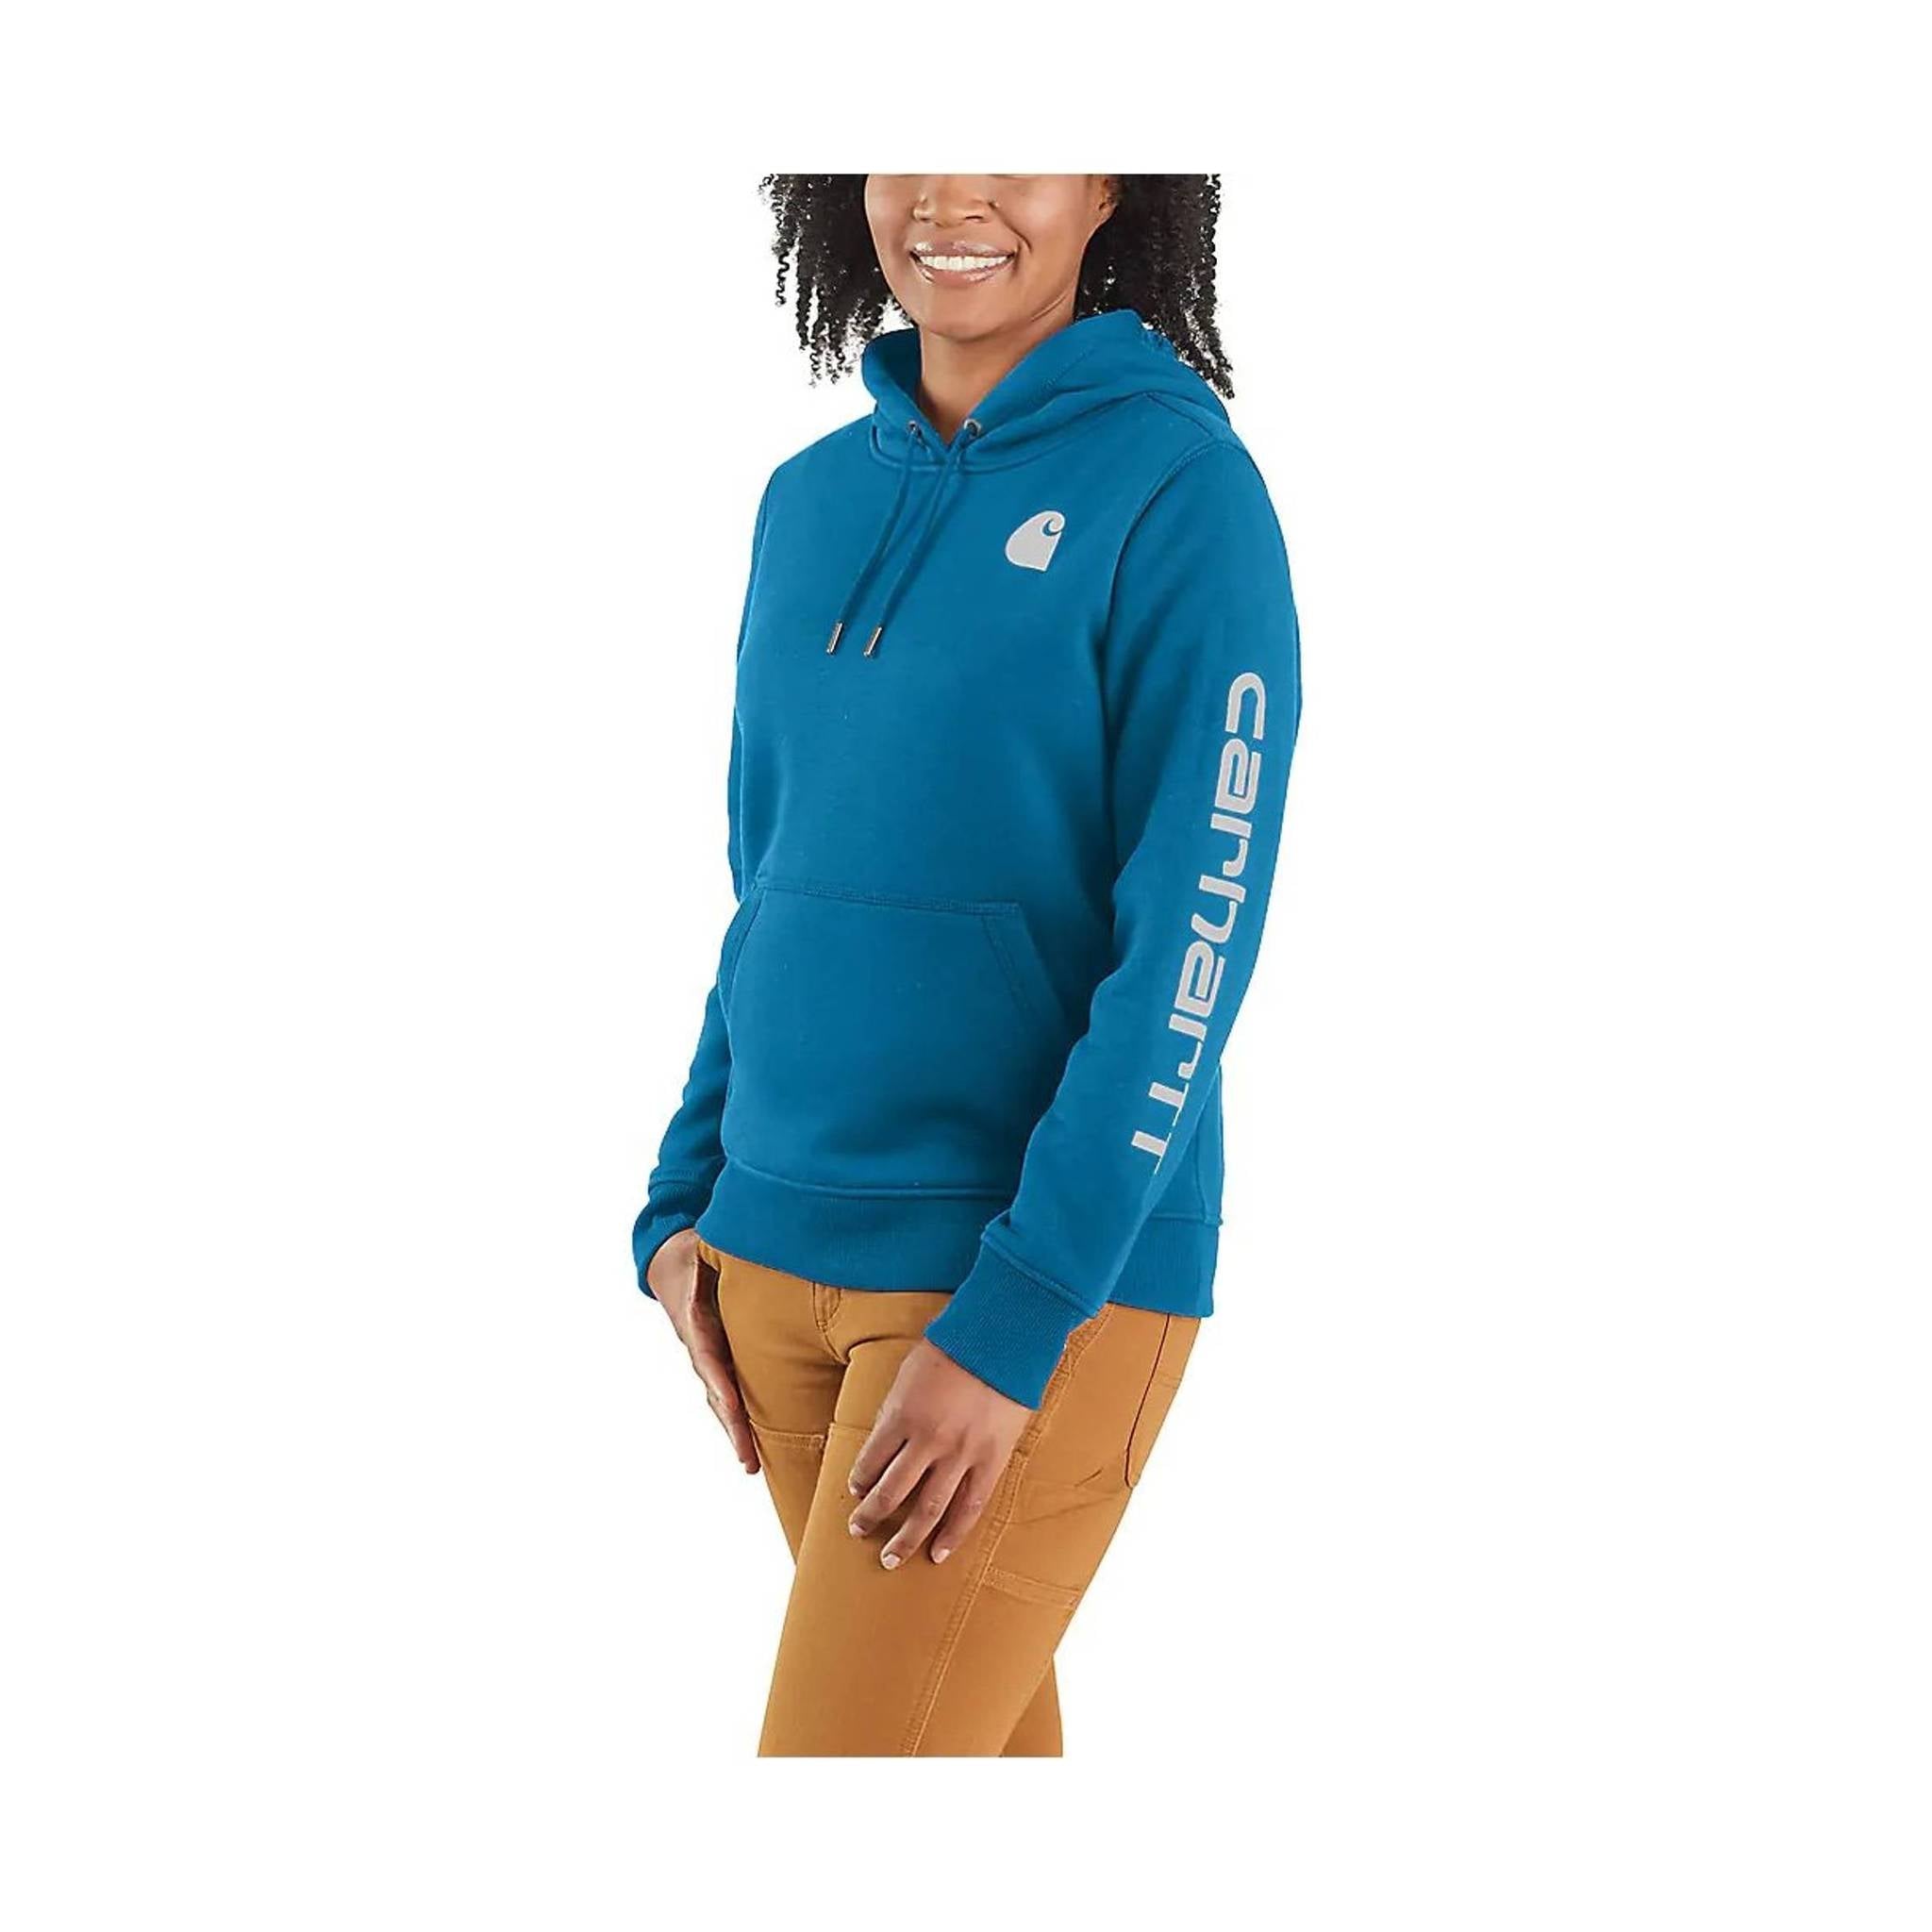 Carhartt Women's Relaxed Fit Midweight Logo Sleeve Graphic